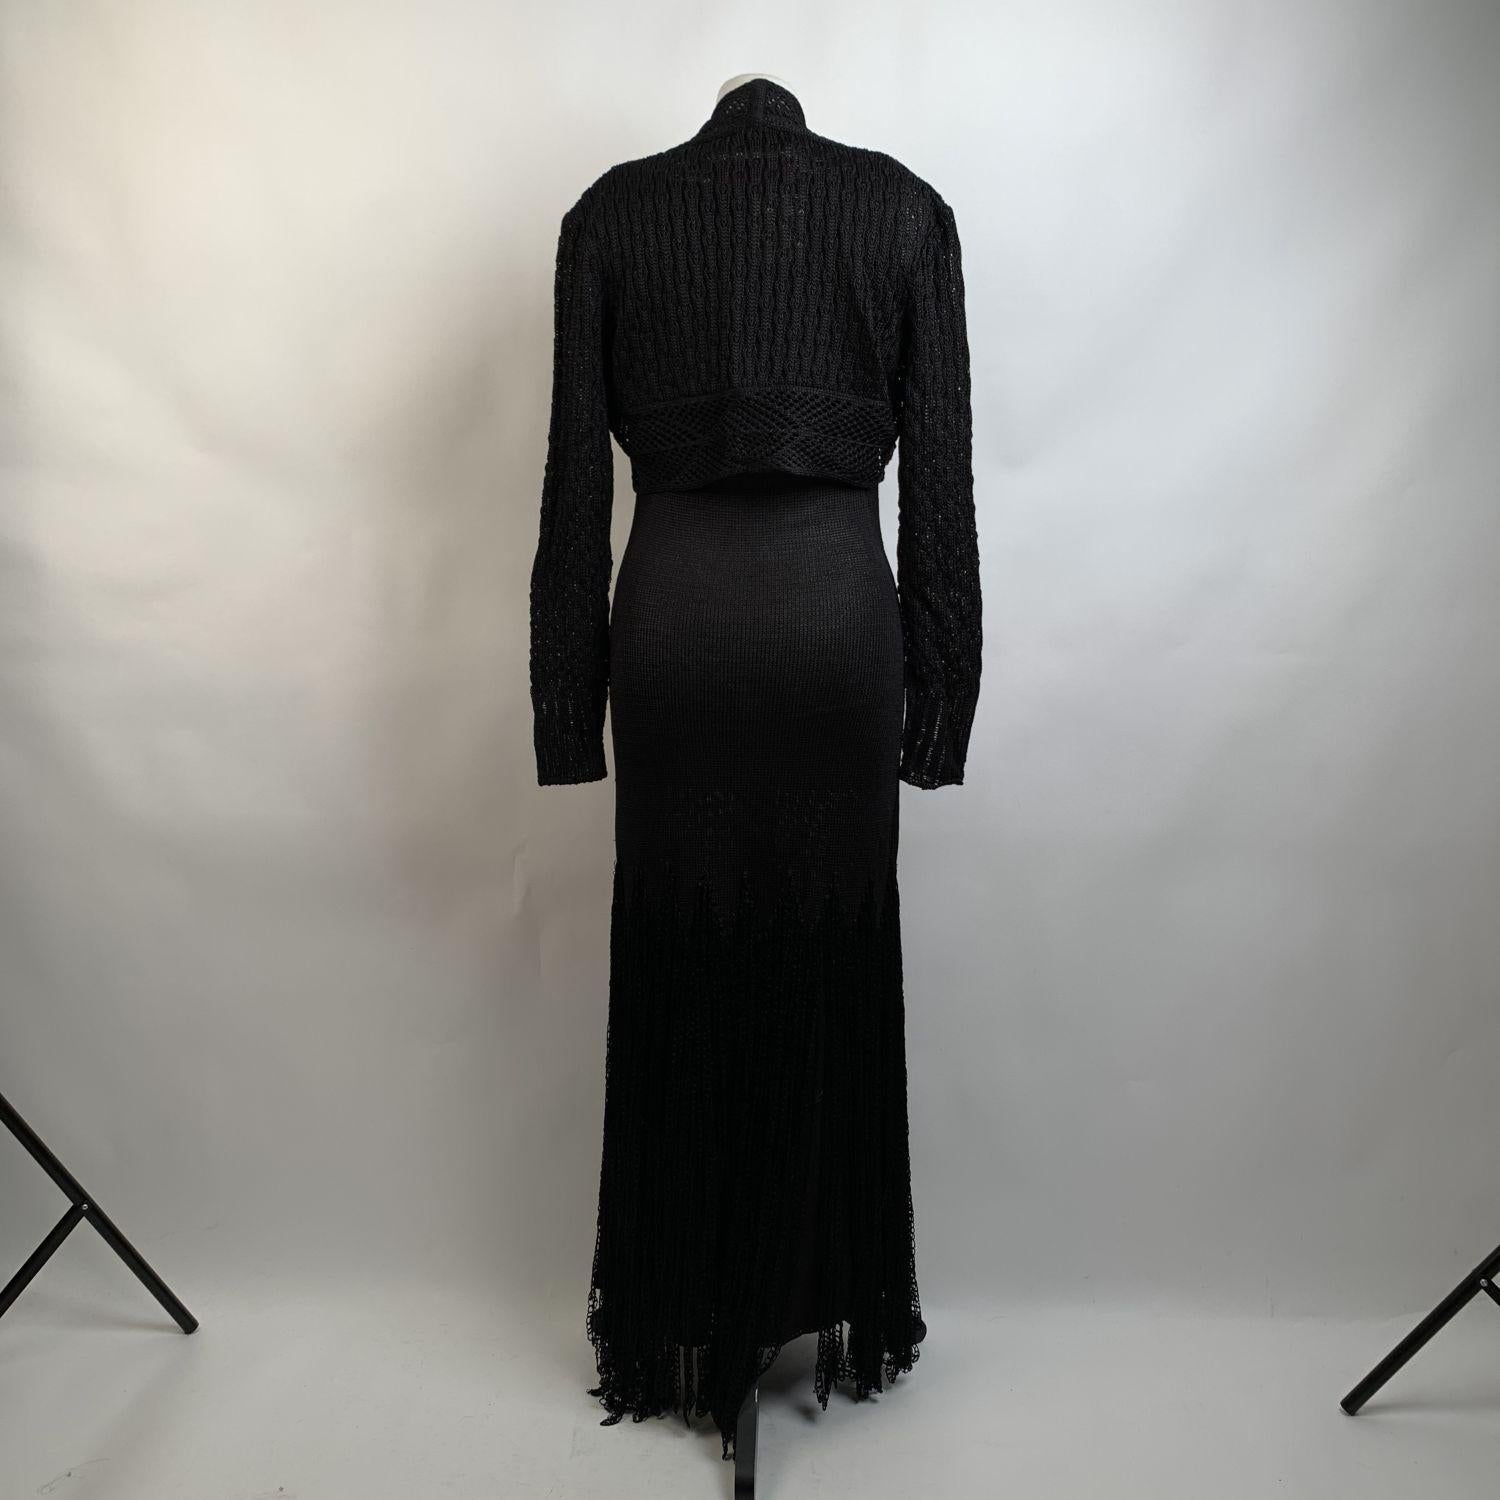 Women's Christian Lacroix Black Light Weight Knit Maxi Dress with Jacket